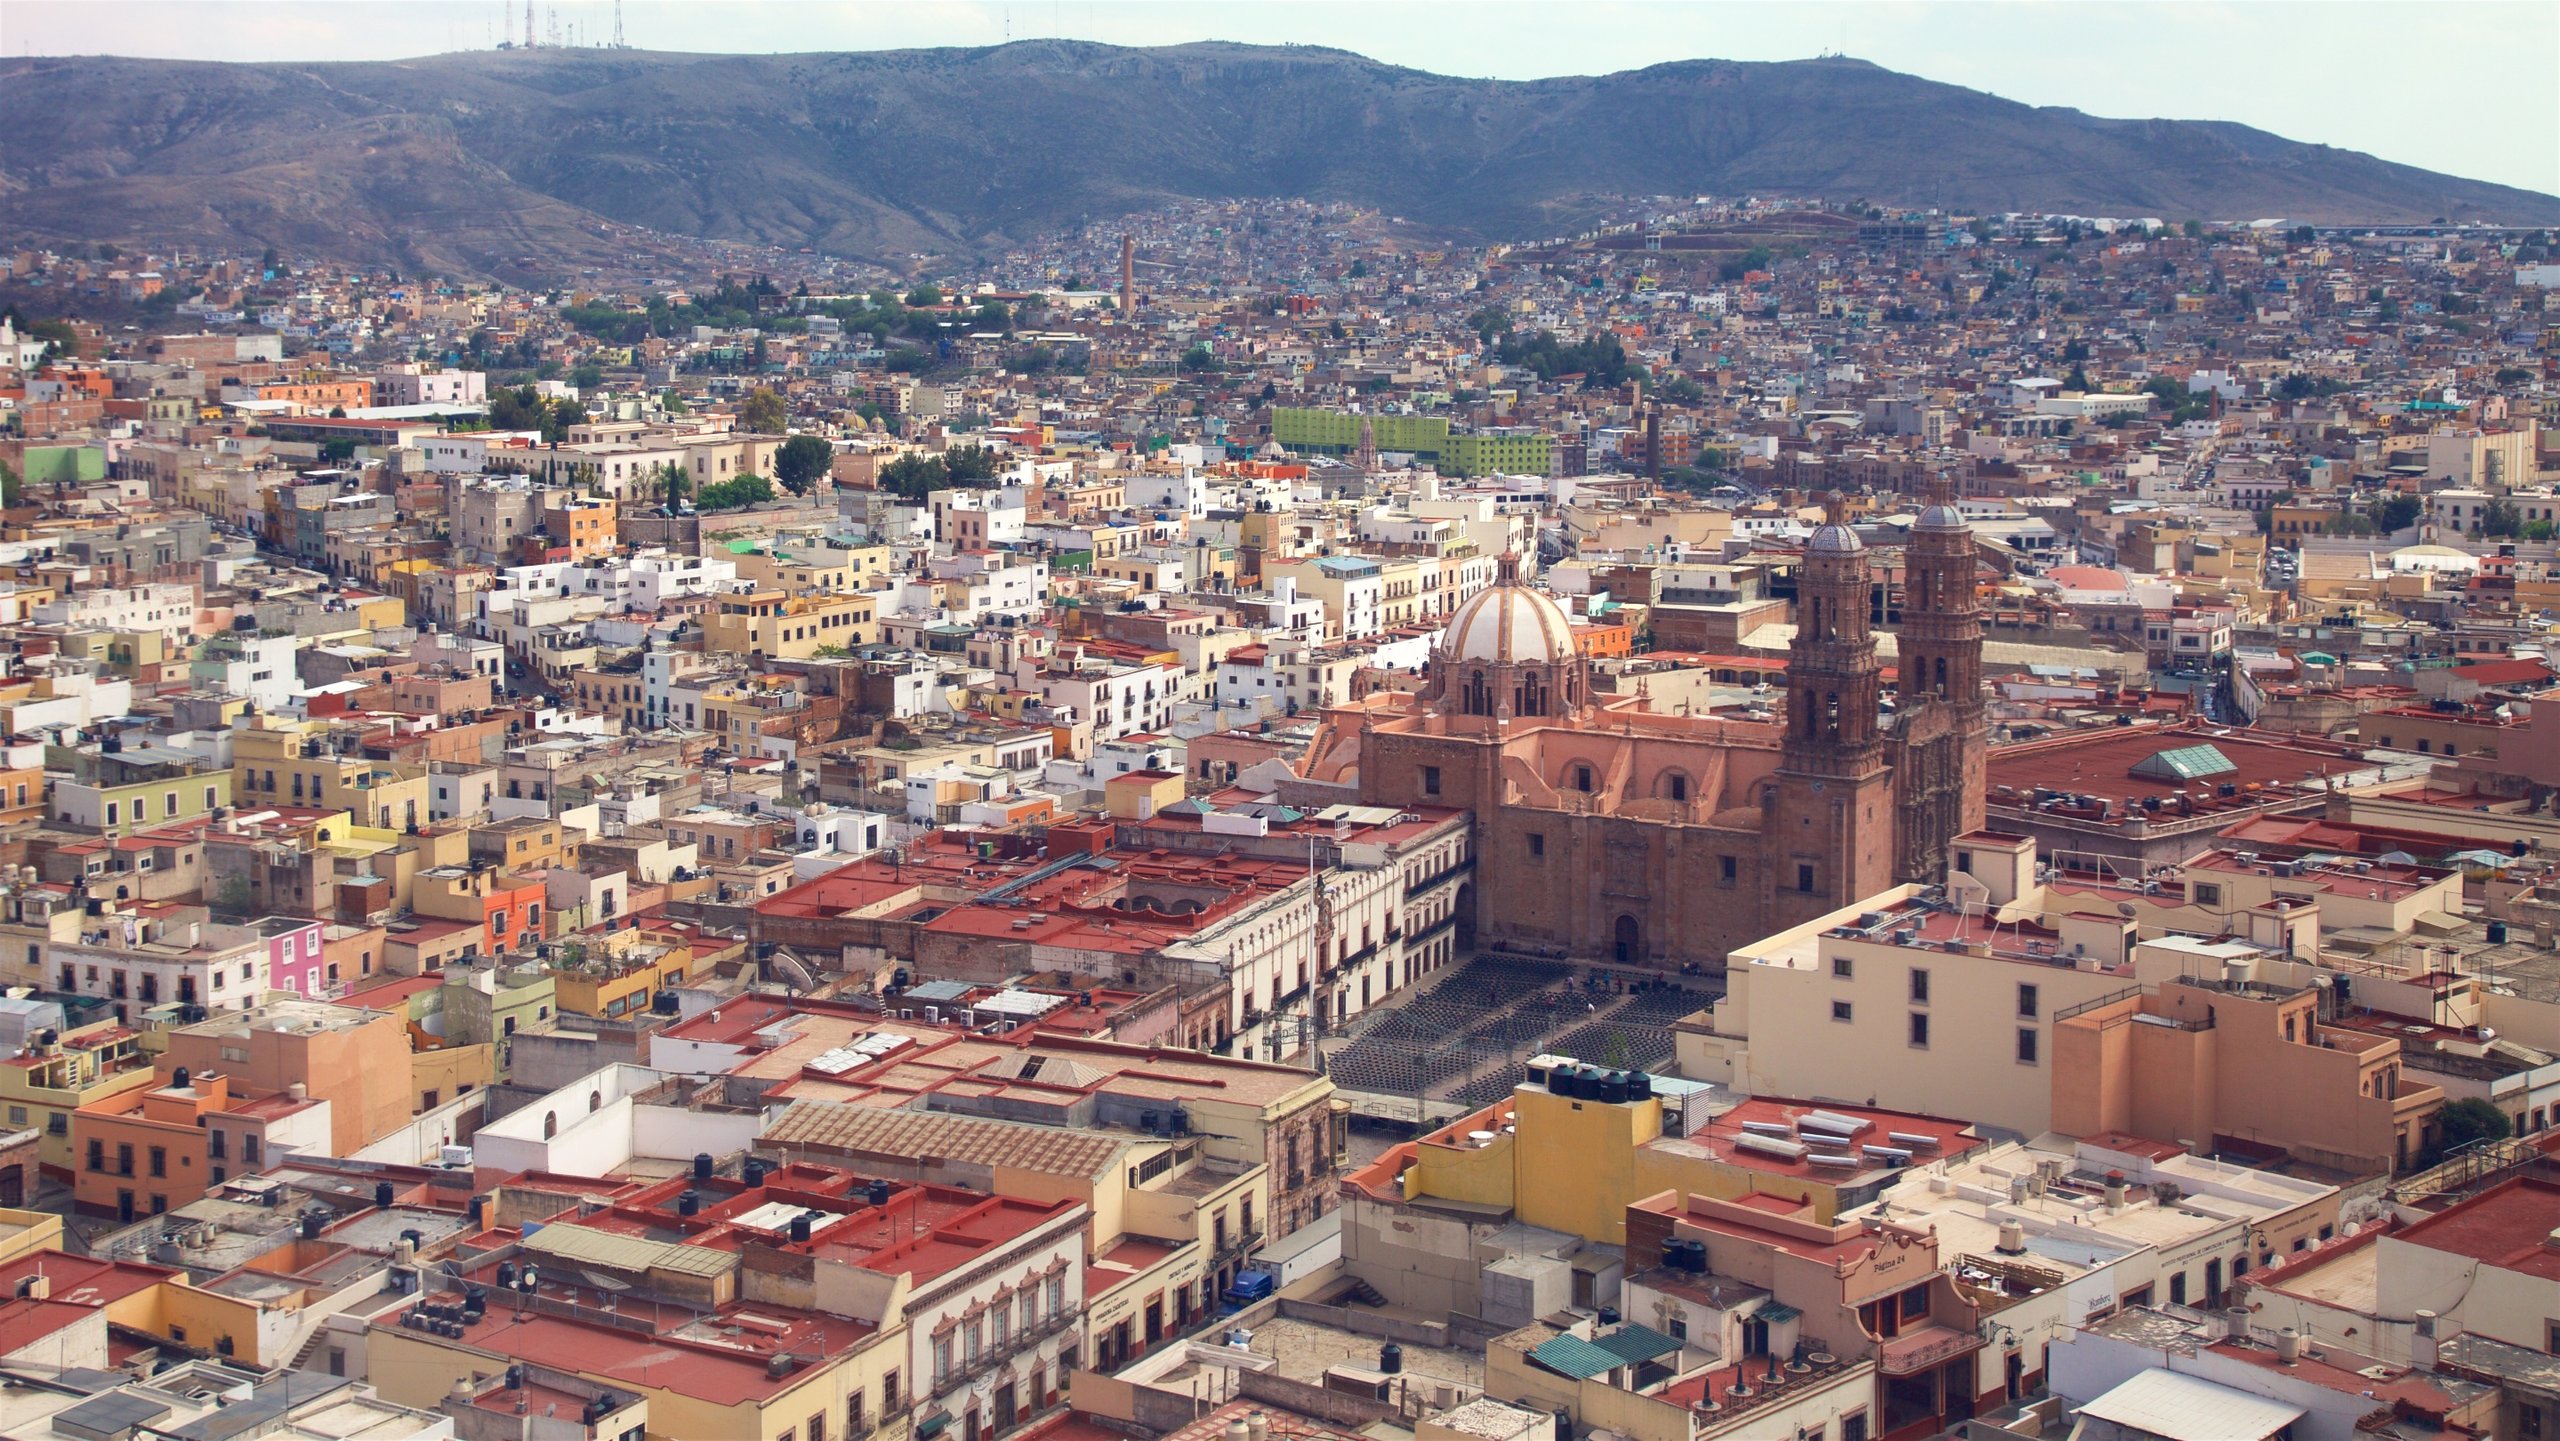 37-facts-about-zacatecas